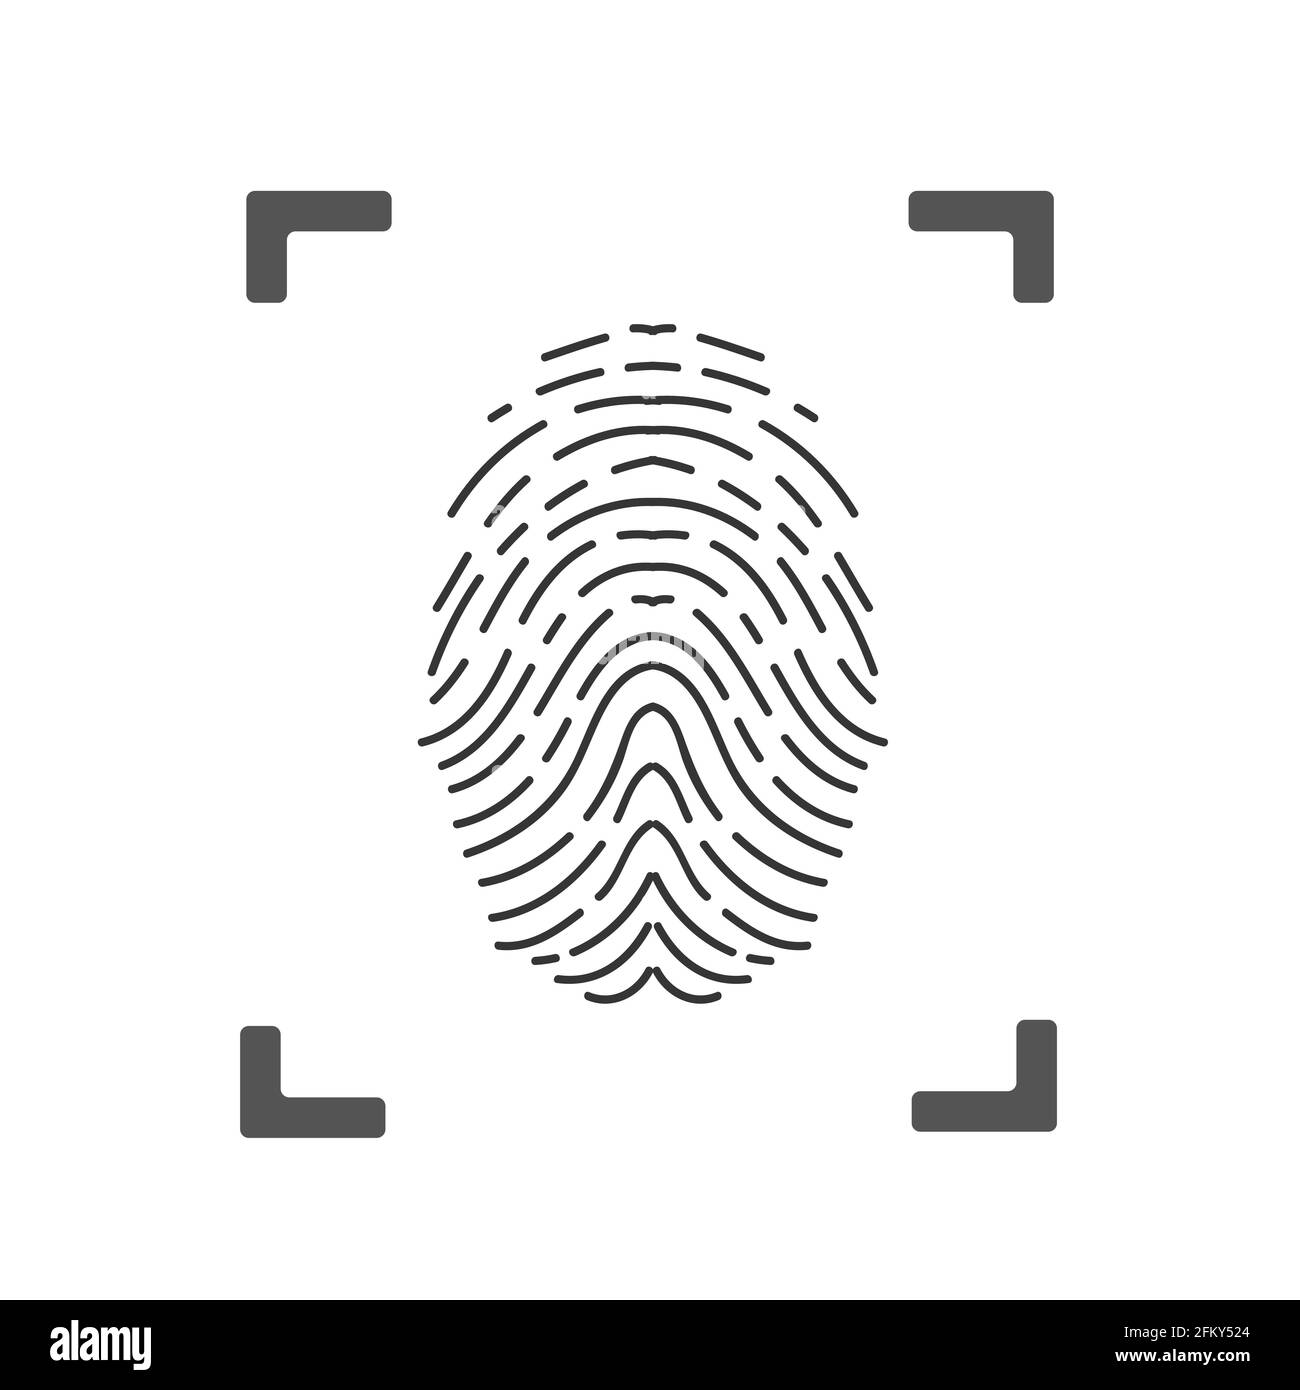 Fingerprint scanning icon for apps with security unlock stock vector Stock Vector